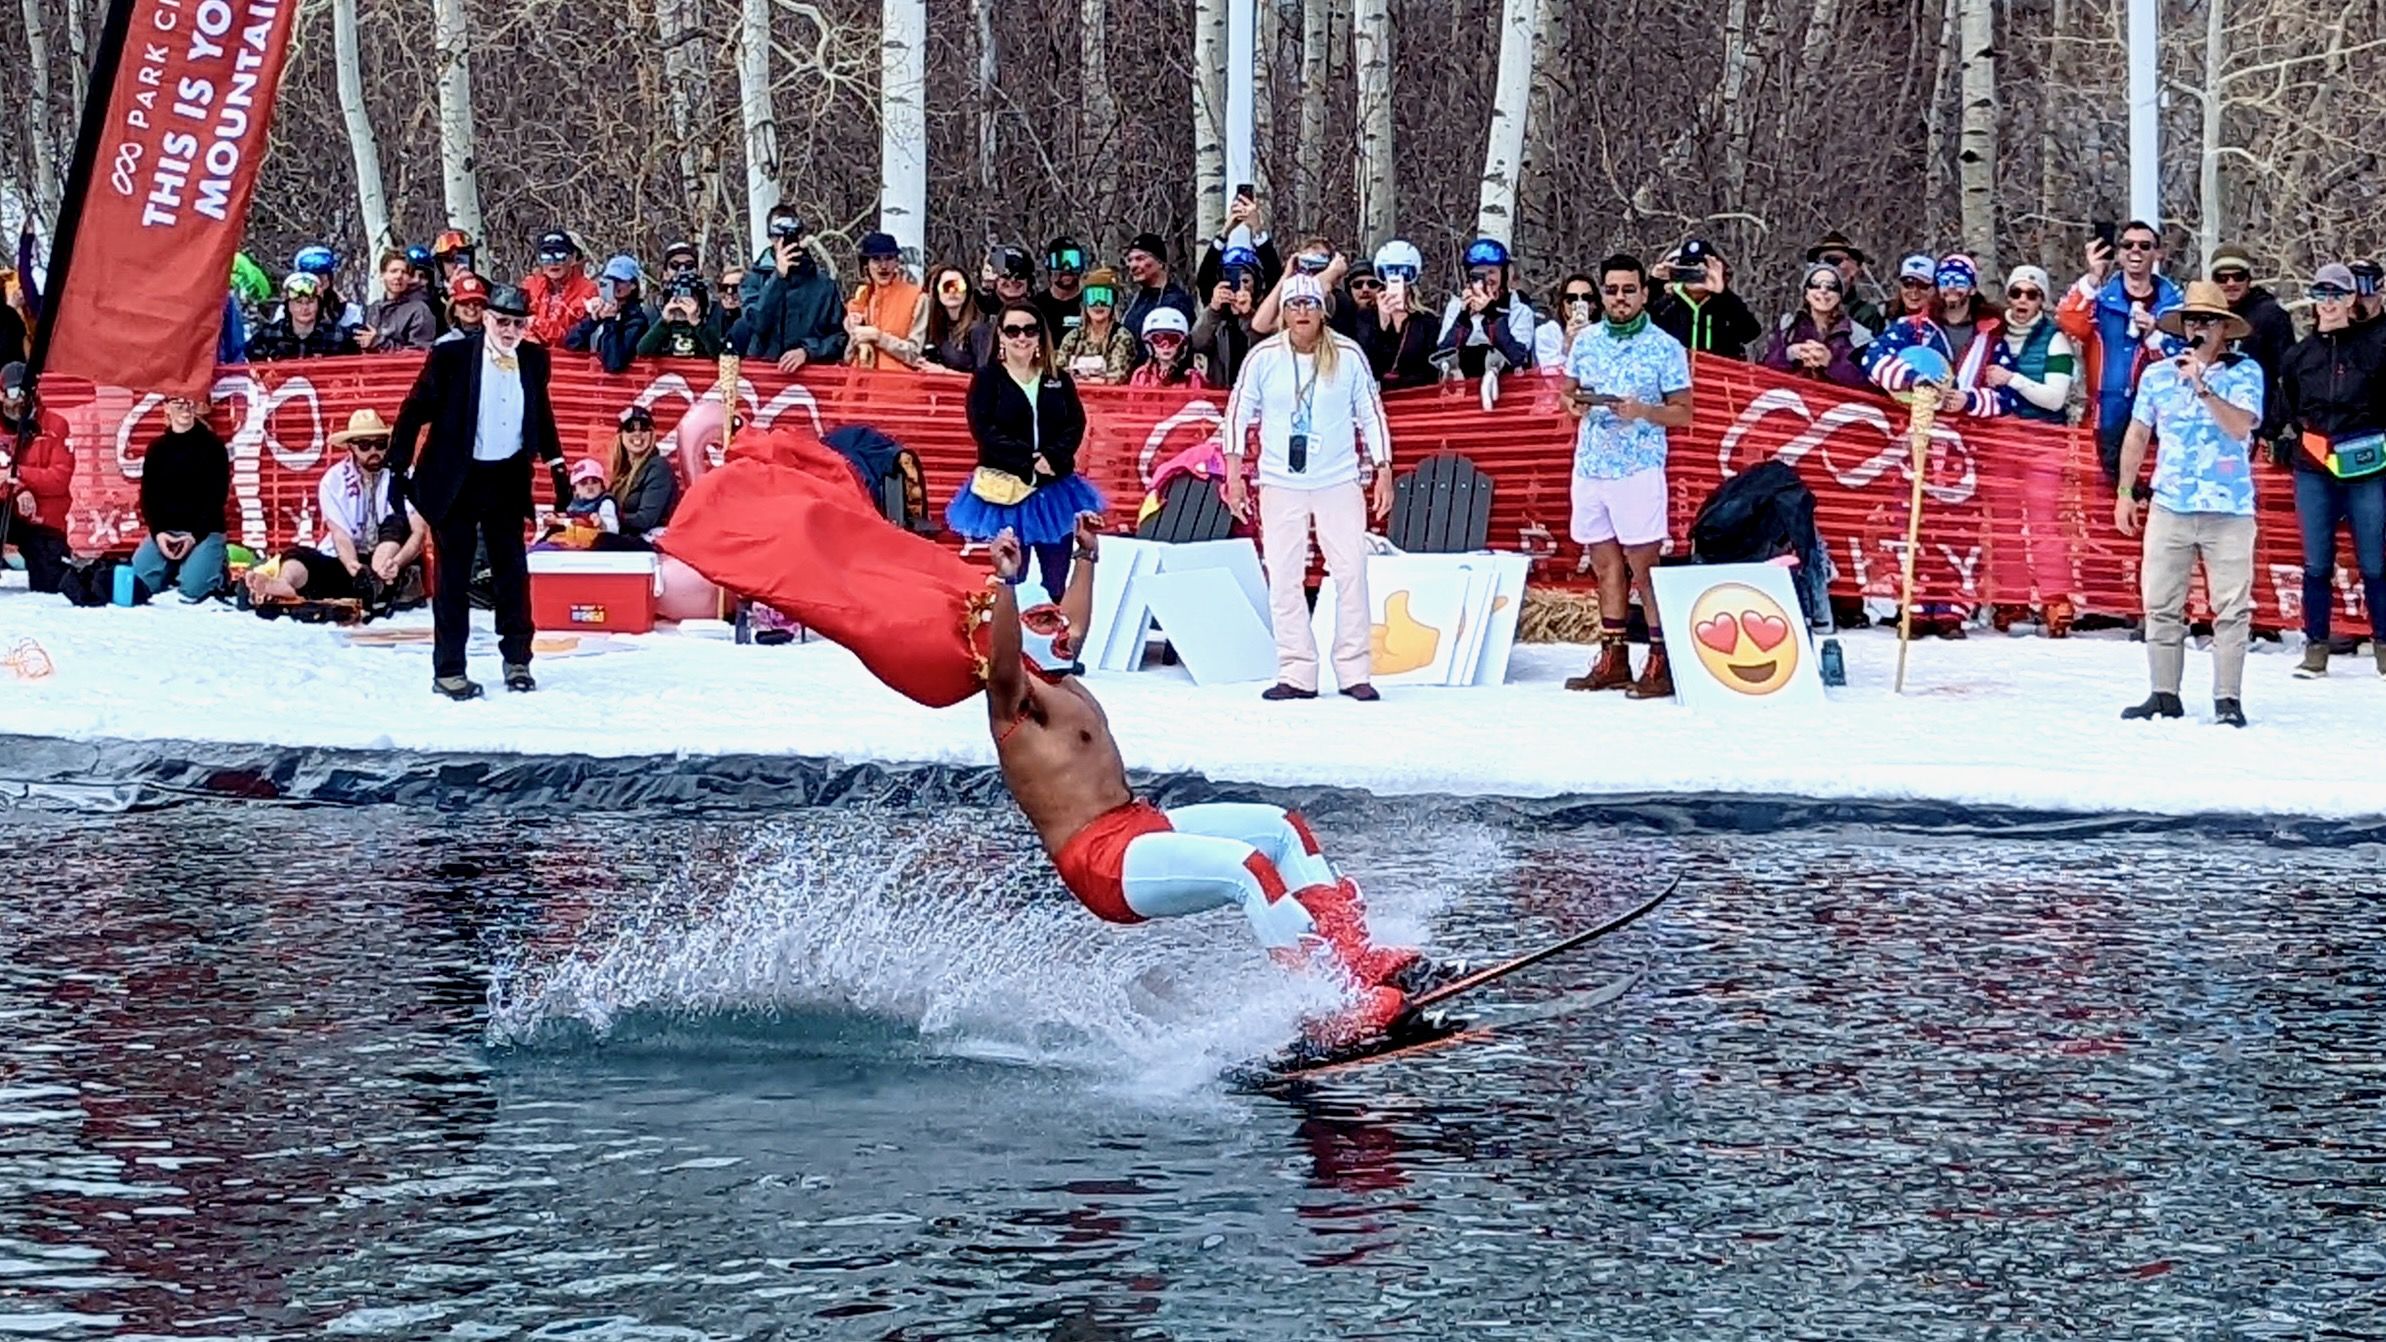 A skier costumed as a Mexican wrestler coasts across a pond of water at the bottom of a ski slope.